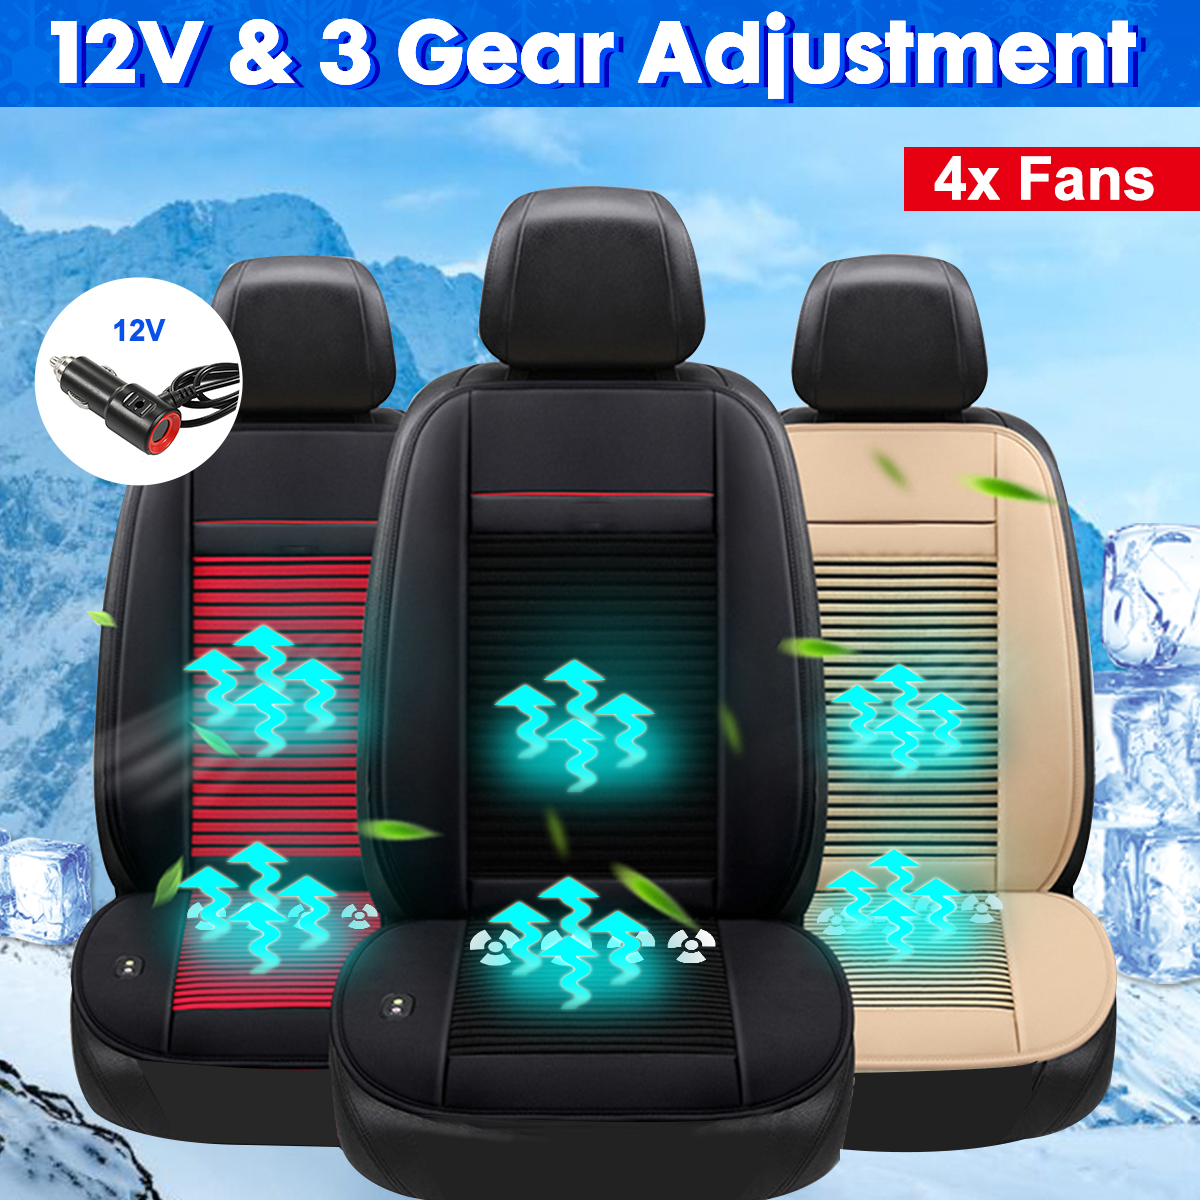 12V Cooling Car Seat Cushion Cover Air Ventilated Fan Conditioned